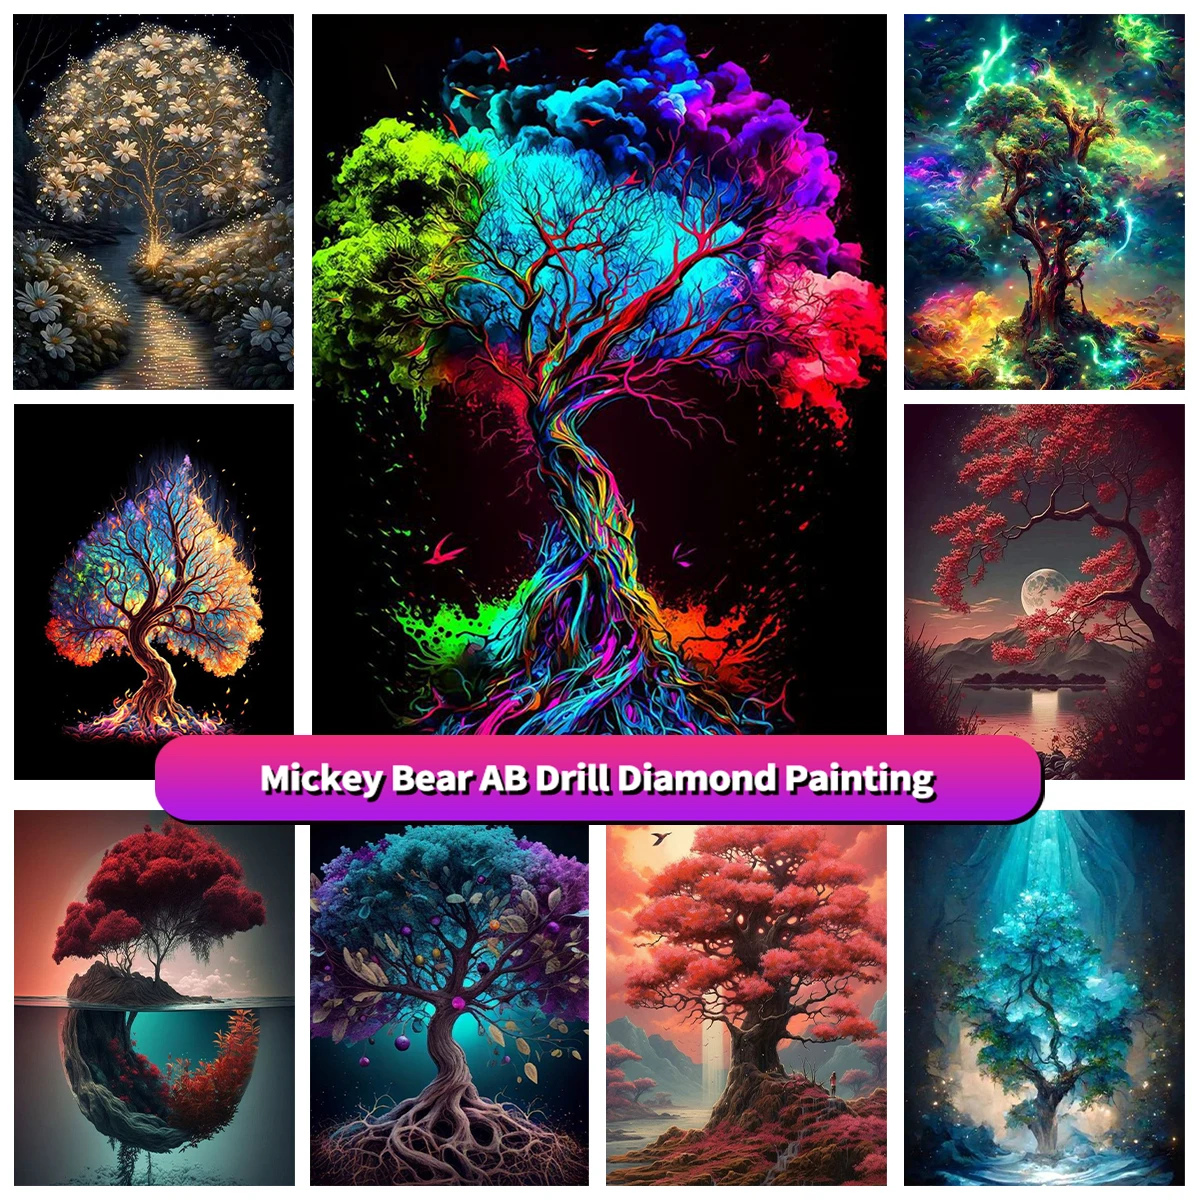 

Fantasy Tree 5D AB Drills Diamond Painting Fantasy Forest Landscape Mosaic Cross Stitch Embroidery Sets Creative Handmade Gift